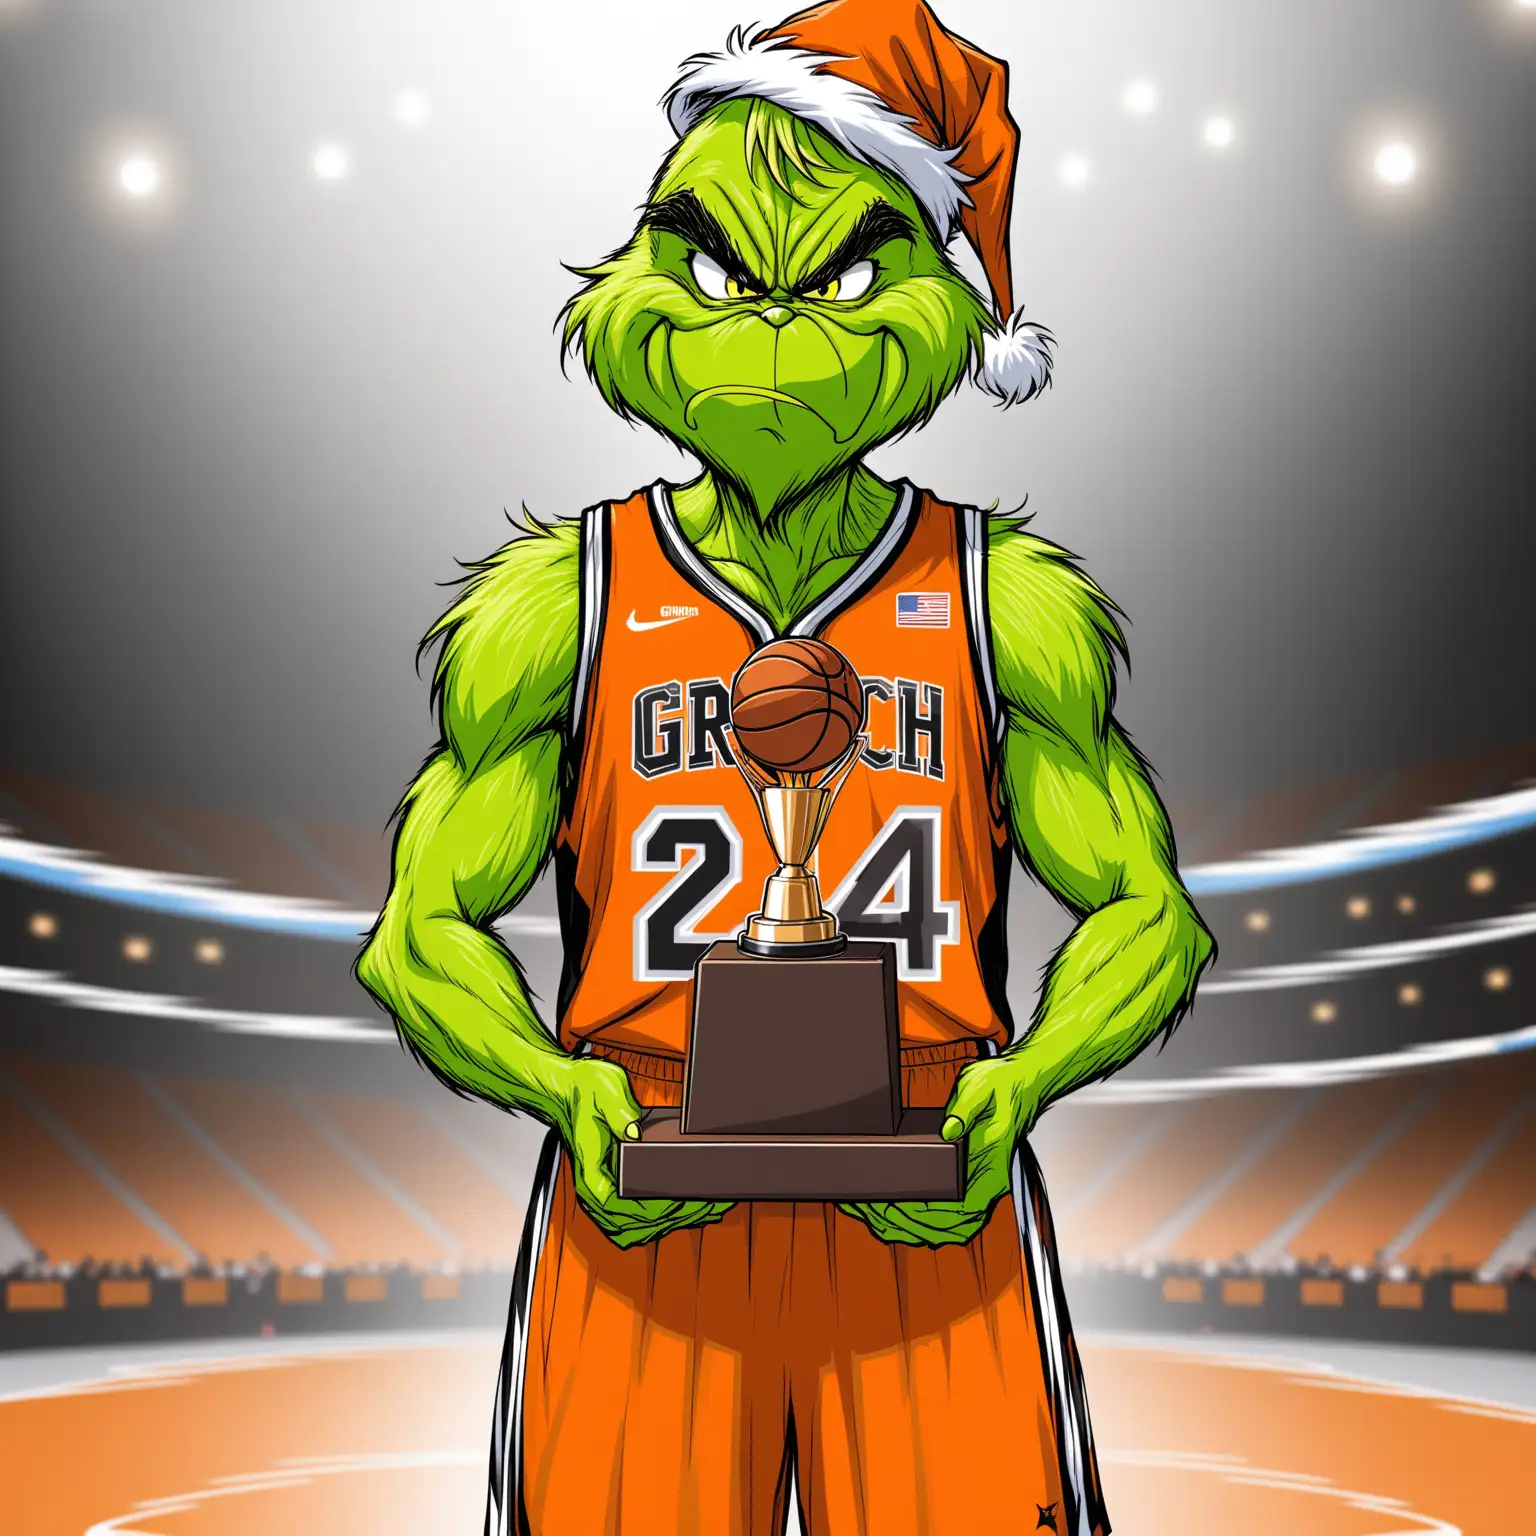 Grinch Triumphant in Orange and Black Basketball Gear with Championship Trophy